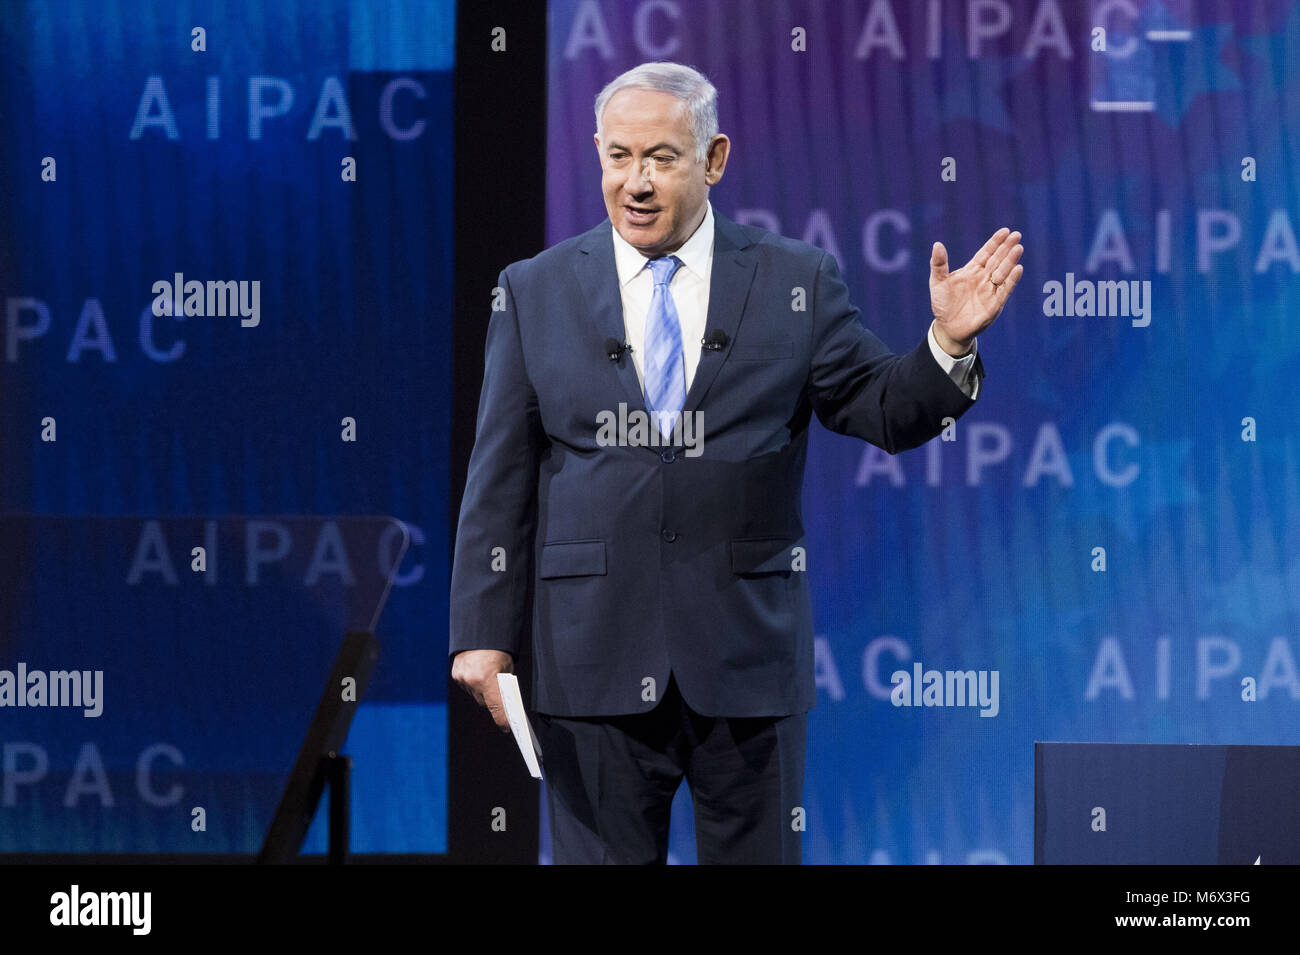 Washington, DC, USA. 6th Mar, 2018. BENJAMIN ''BIBI'' NETANYAHU, Prime Minister of Israel, speaking at the AIPAC (American Israel Public Affairs Committee) Policy Conference at the Walter E. Washington Convention Center in Washington, DC on March 6, 2018 Credit: Michael Brochstein/ZUMA Wire/Alamy Live News Stock Photo